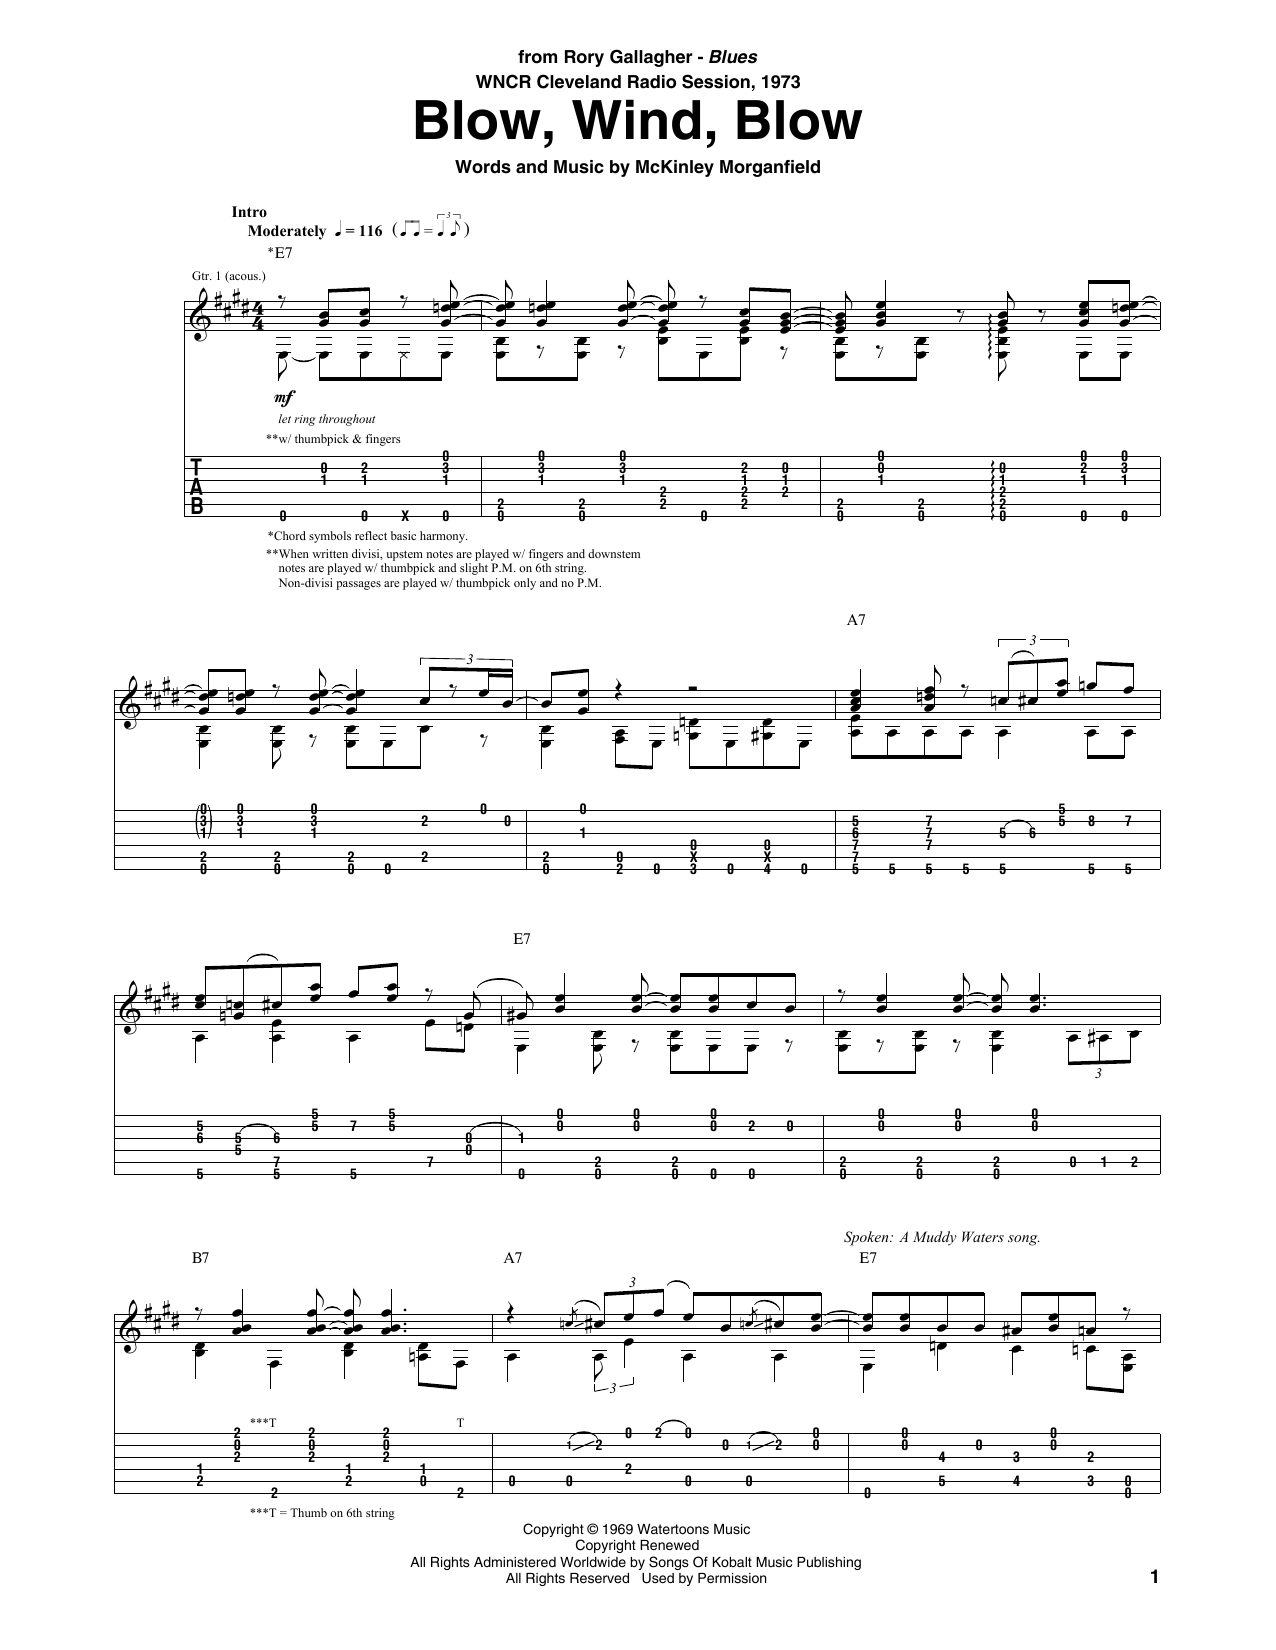 Download Rory Gallagher Blow, Wind, Blow Sheet Music